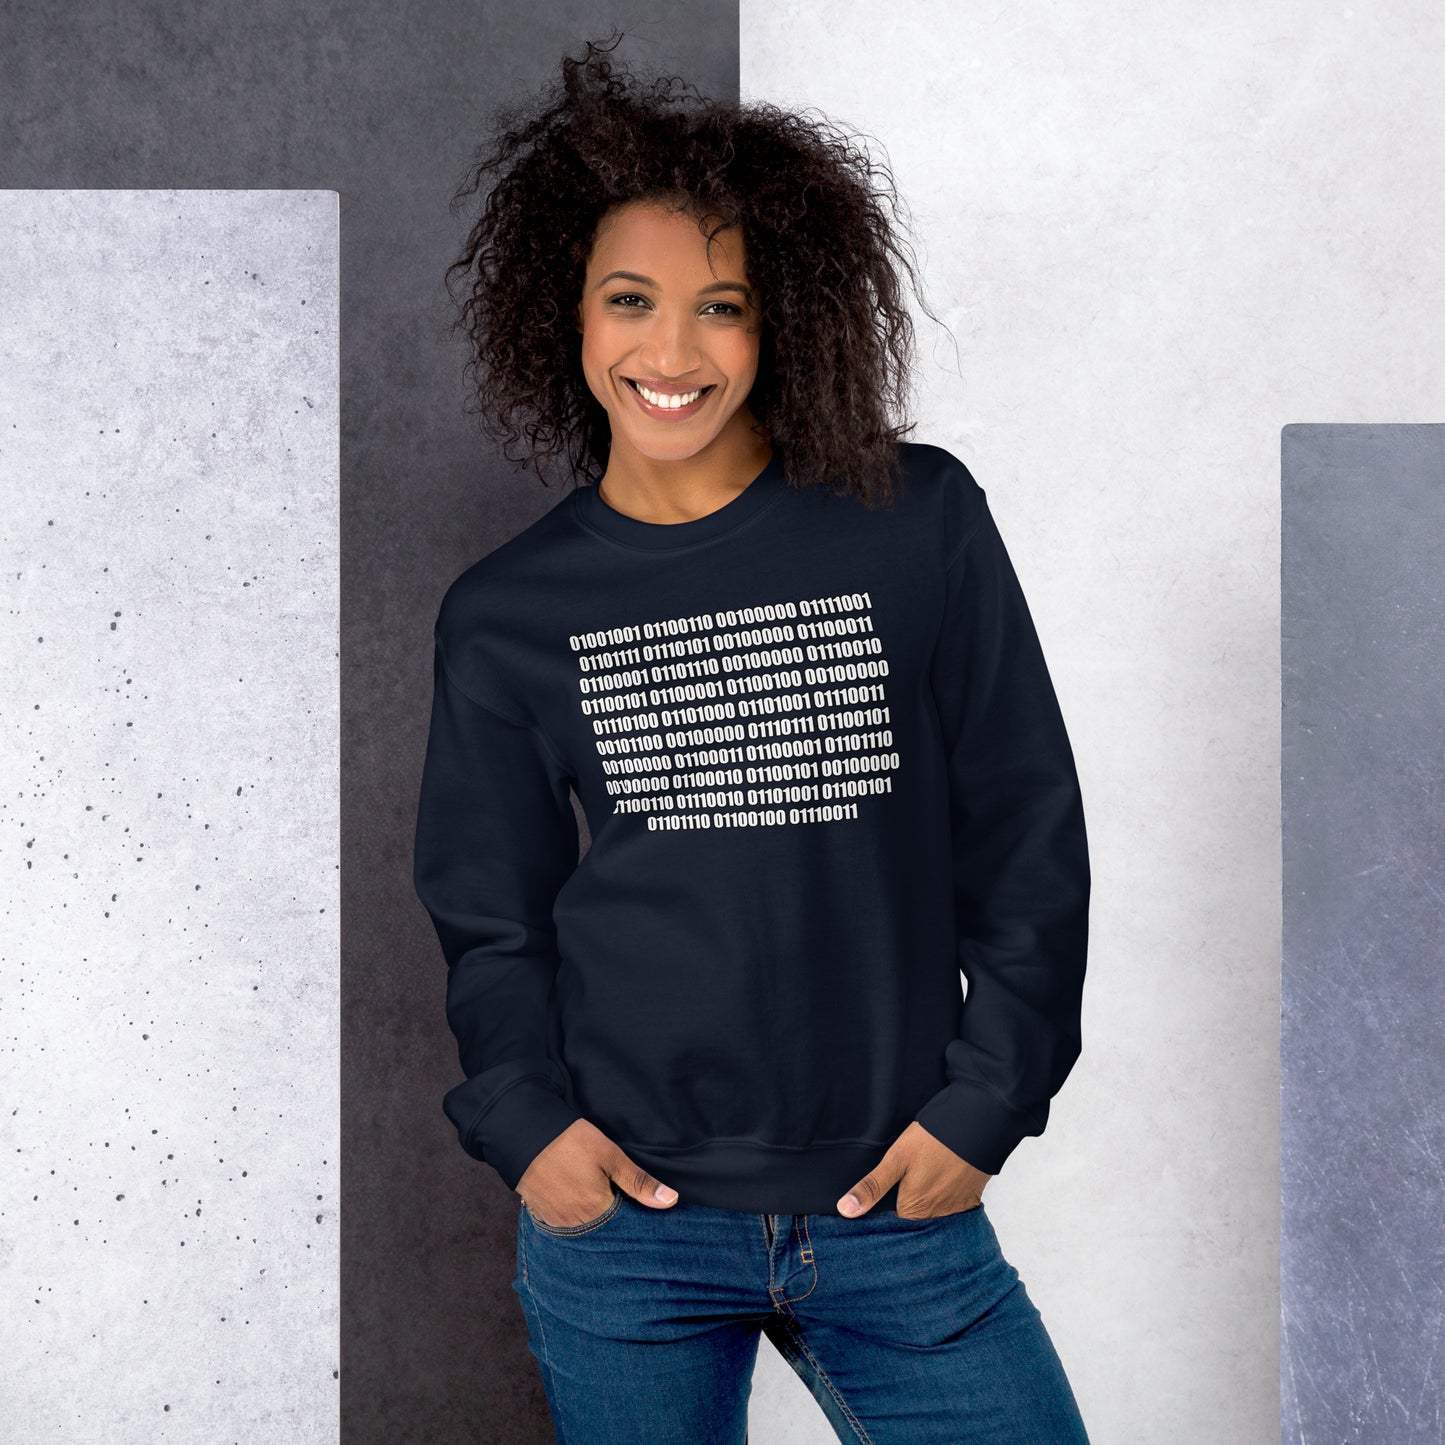 Women with navy sweatshirt with binaire text "If you can read this"